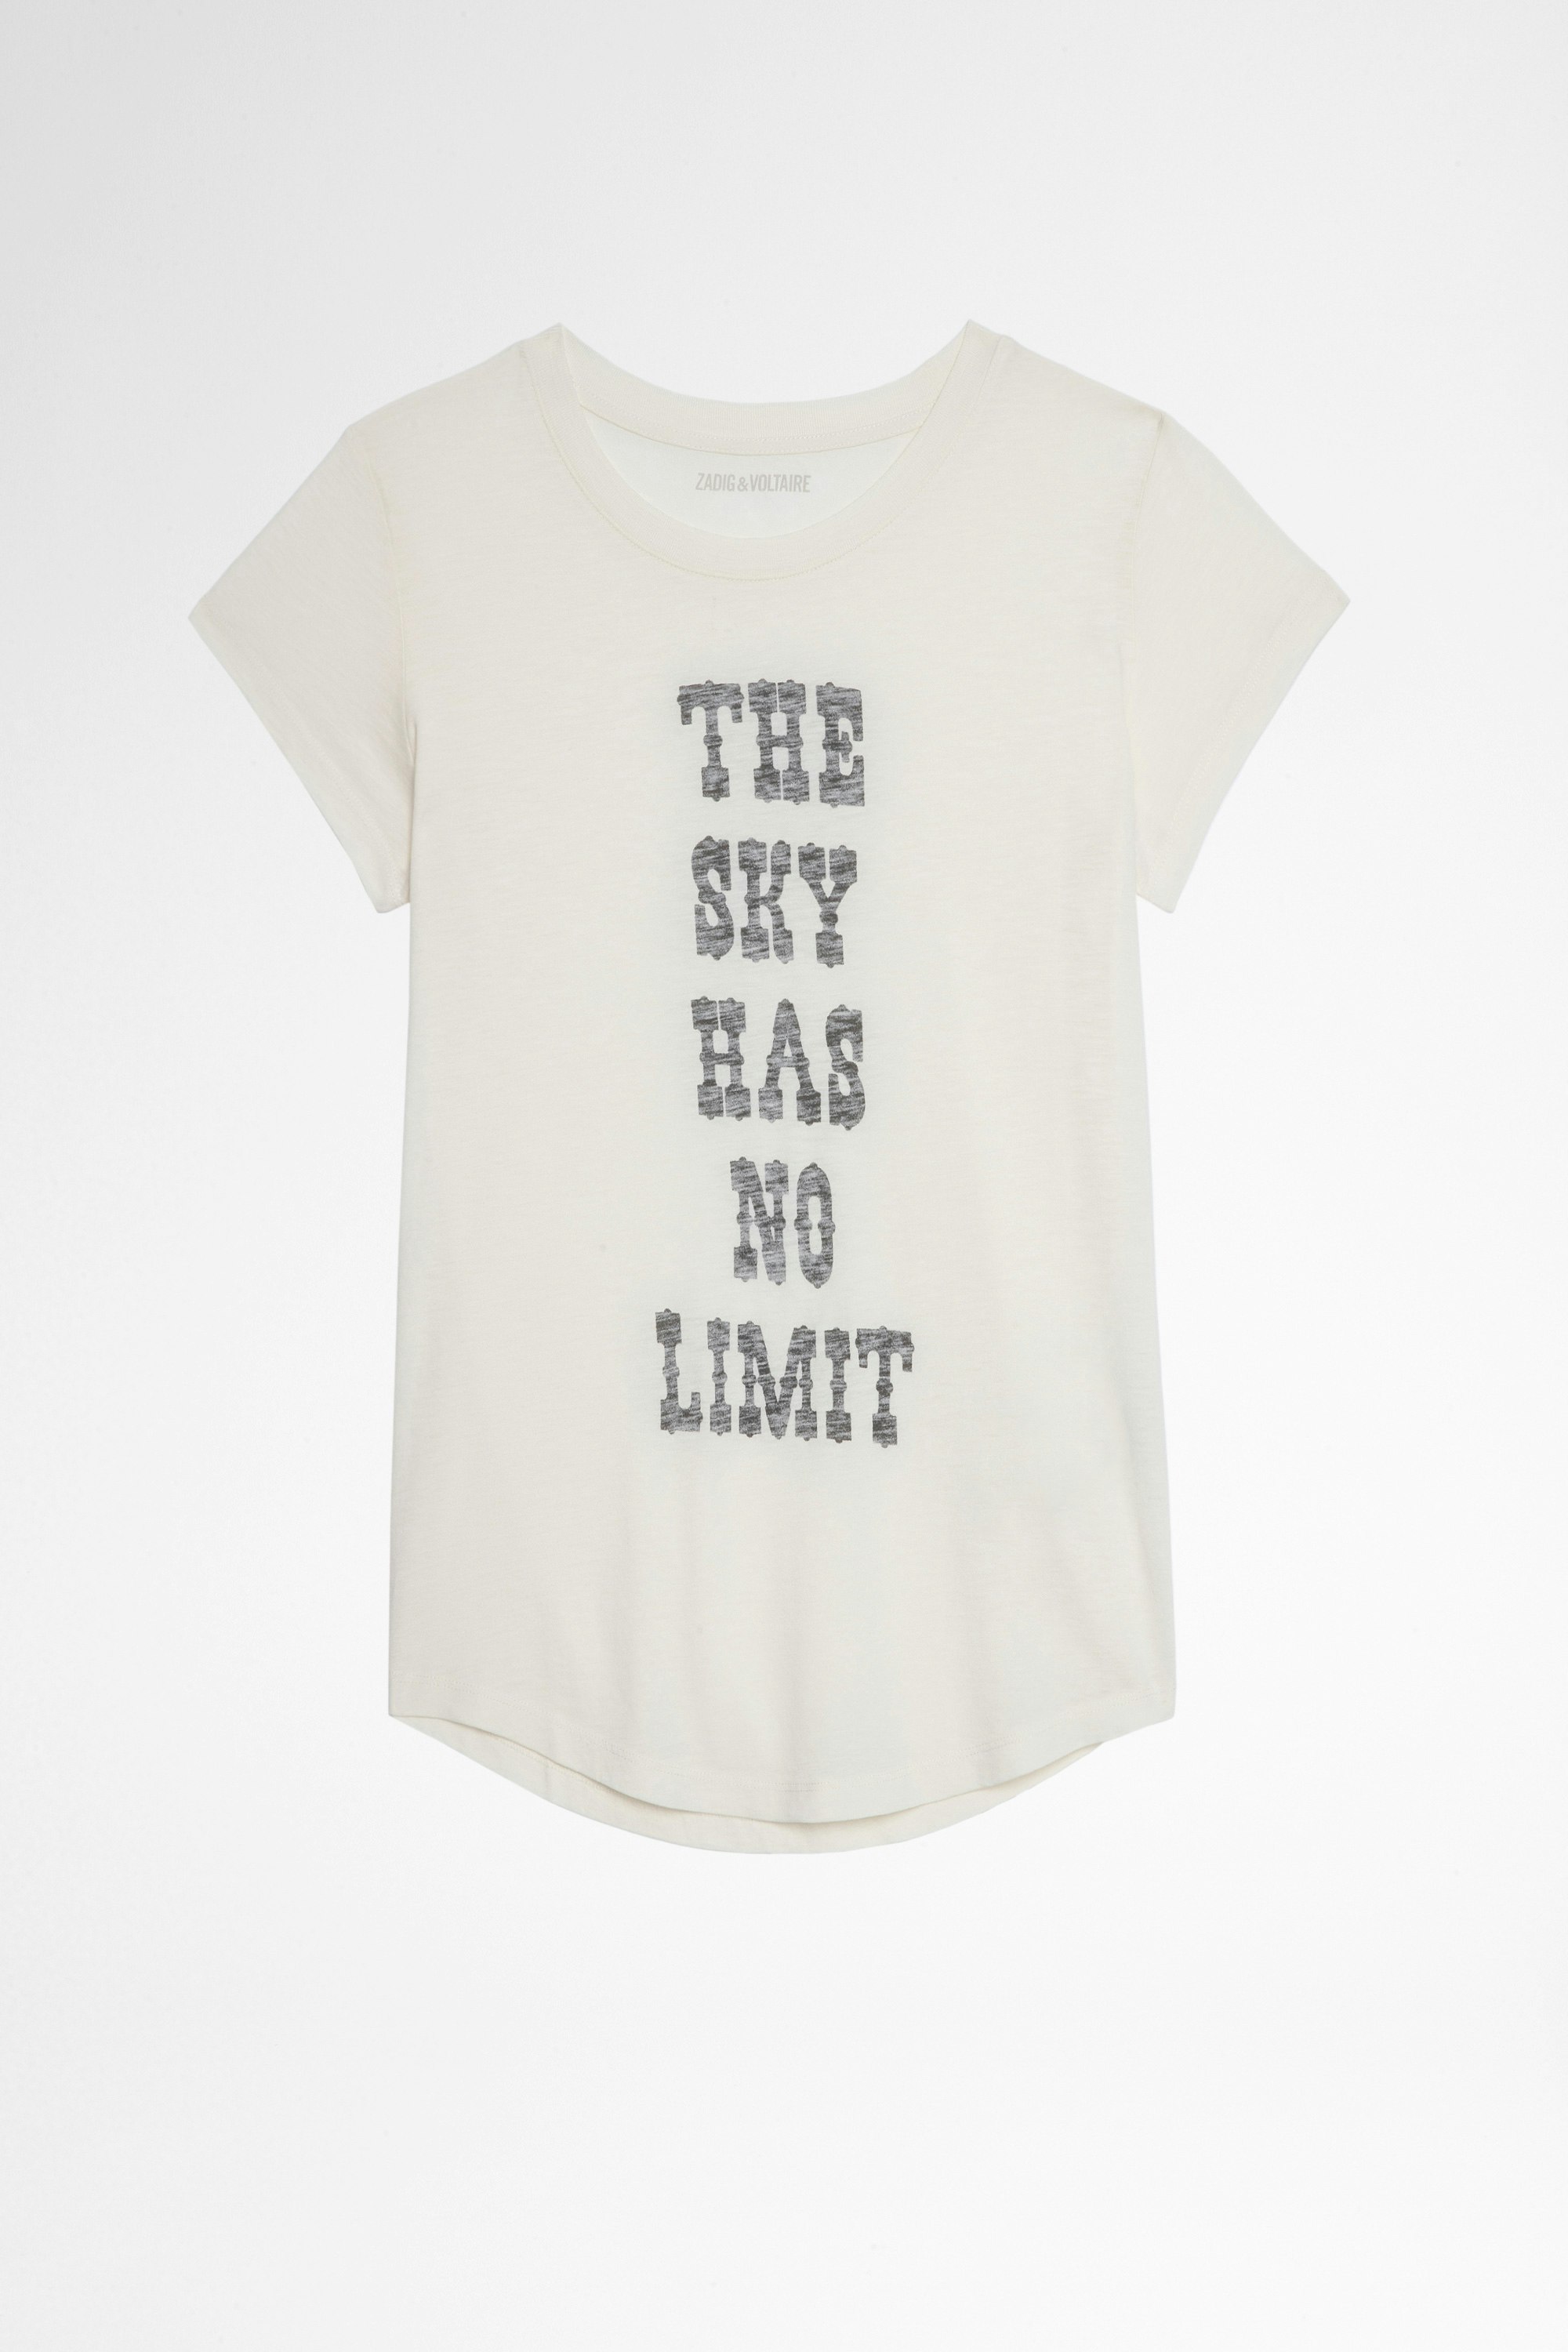 Woop T-shirt White The sky has no limit T-shirt